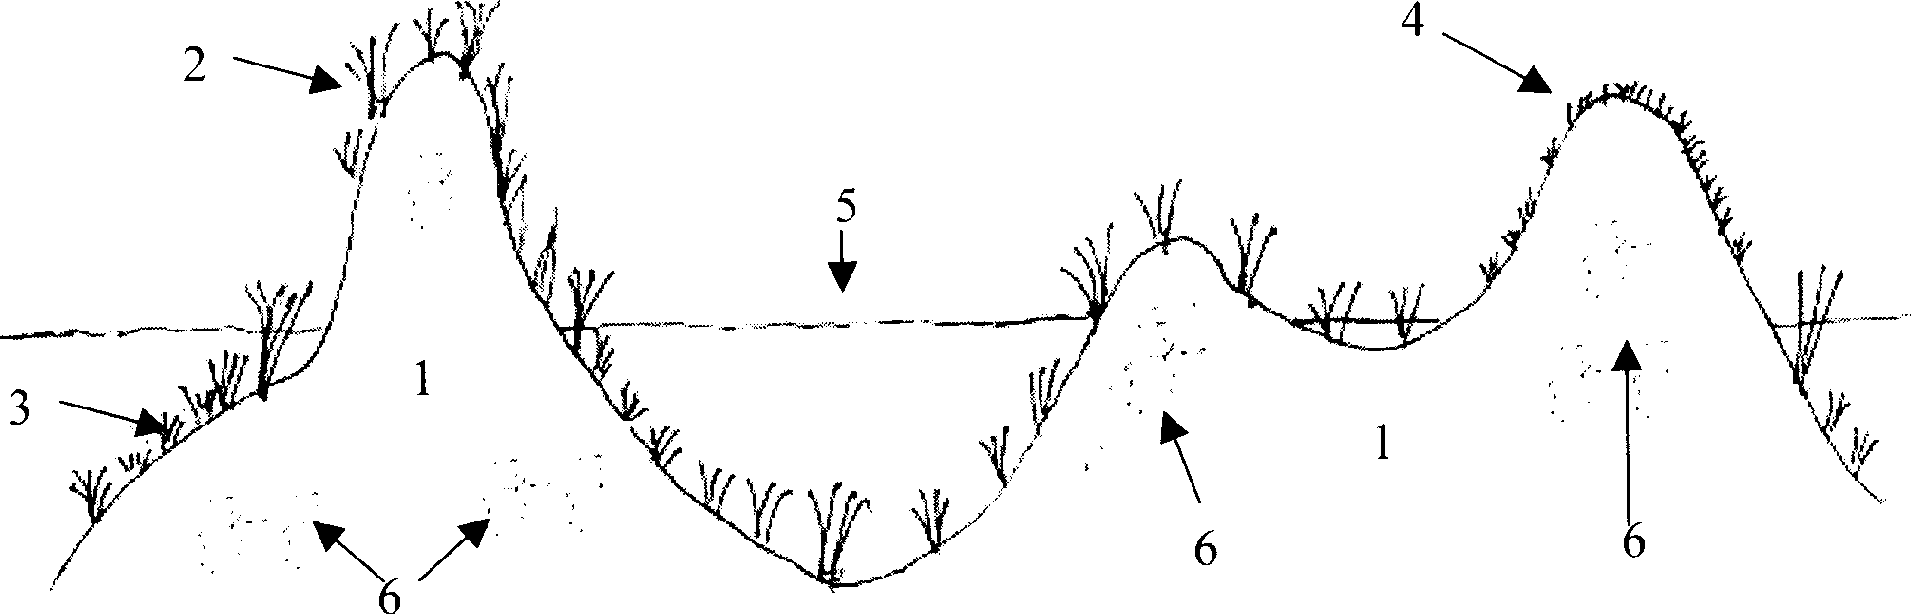 Landscape water treating system